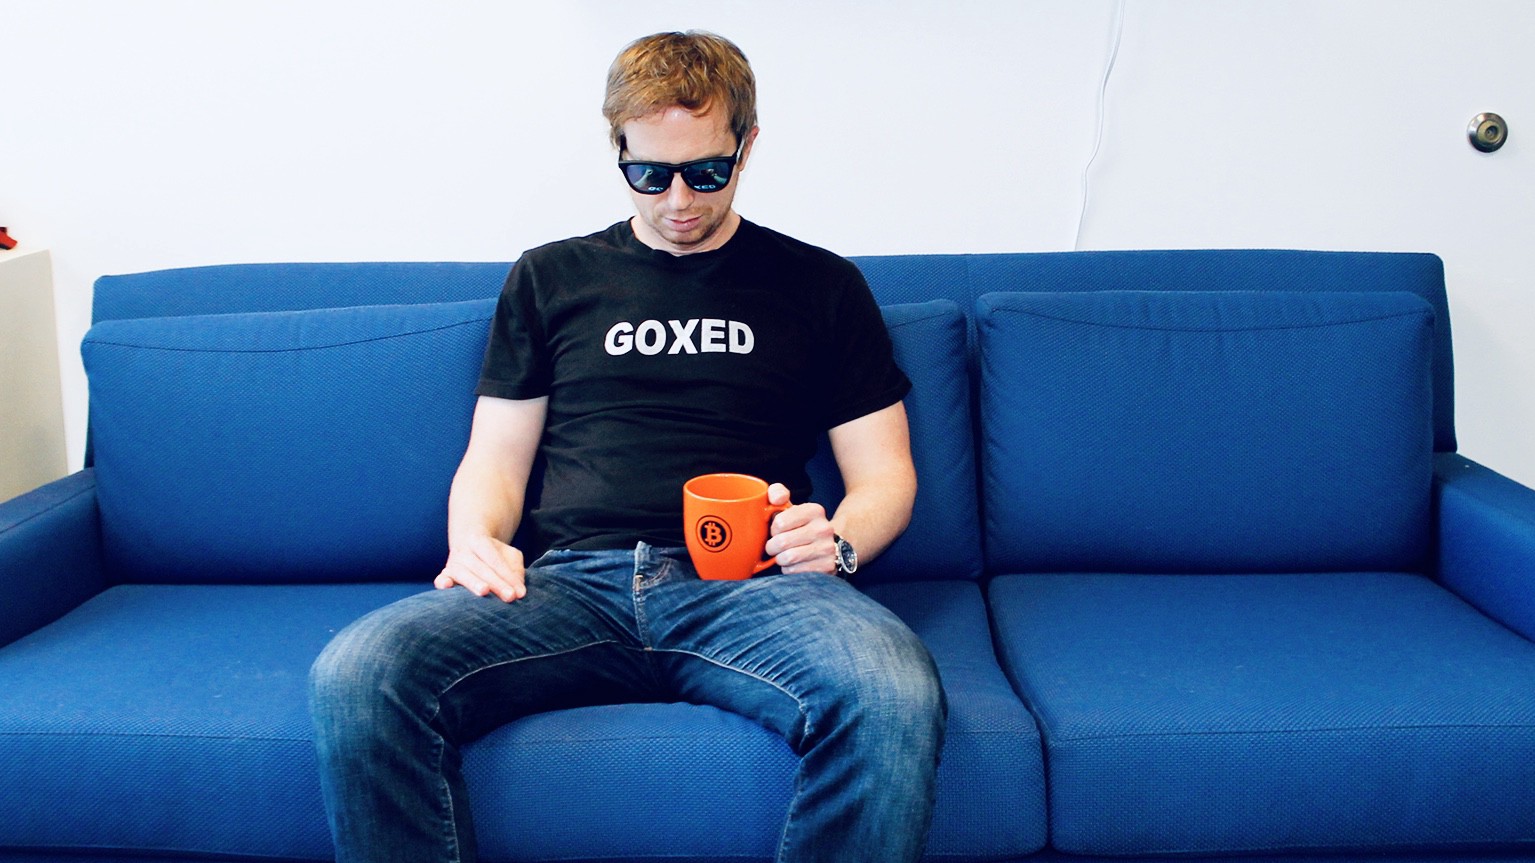 Erik Voorhees, ShapeShift founder sitting on a blue sofa with a t-shirt slogan "GOXED" referring to Mt. Gox crypto hack.